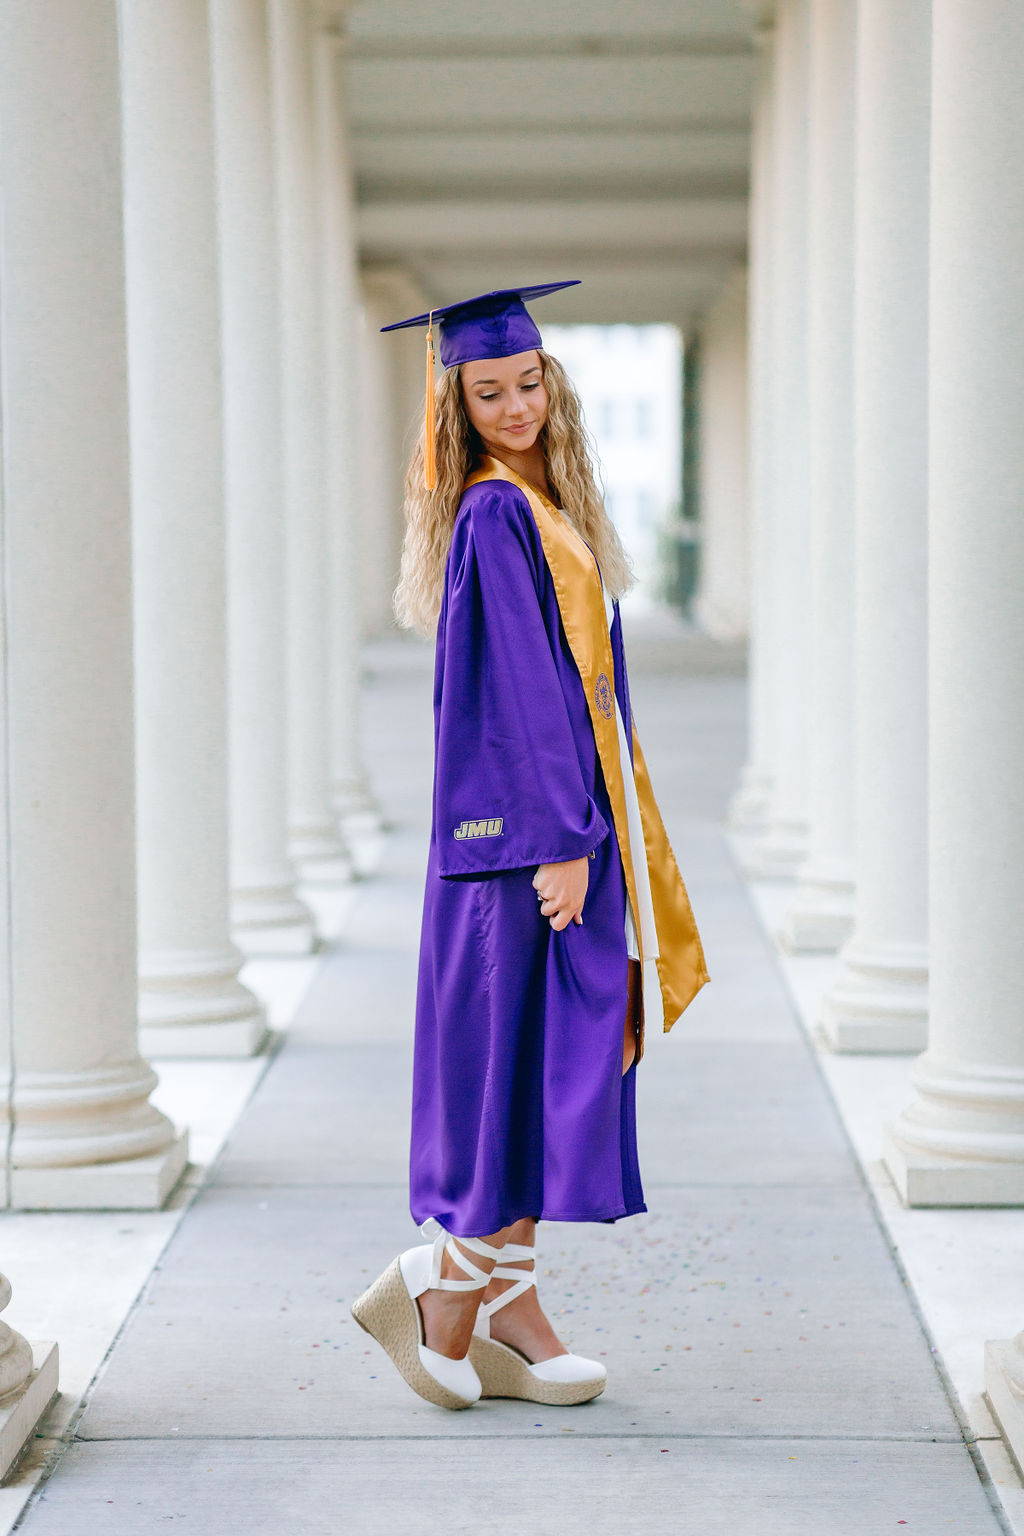 A graduate in her purple cap and gown stands in a row of columns looking down her shoulder for jmu graduation photos